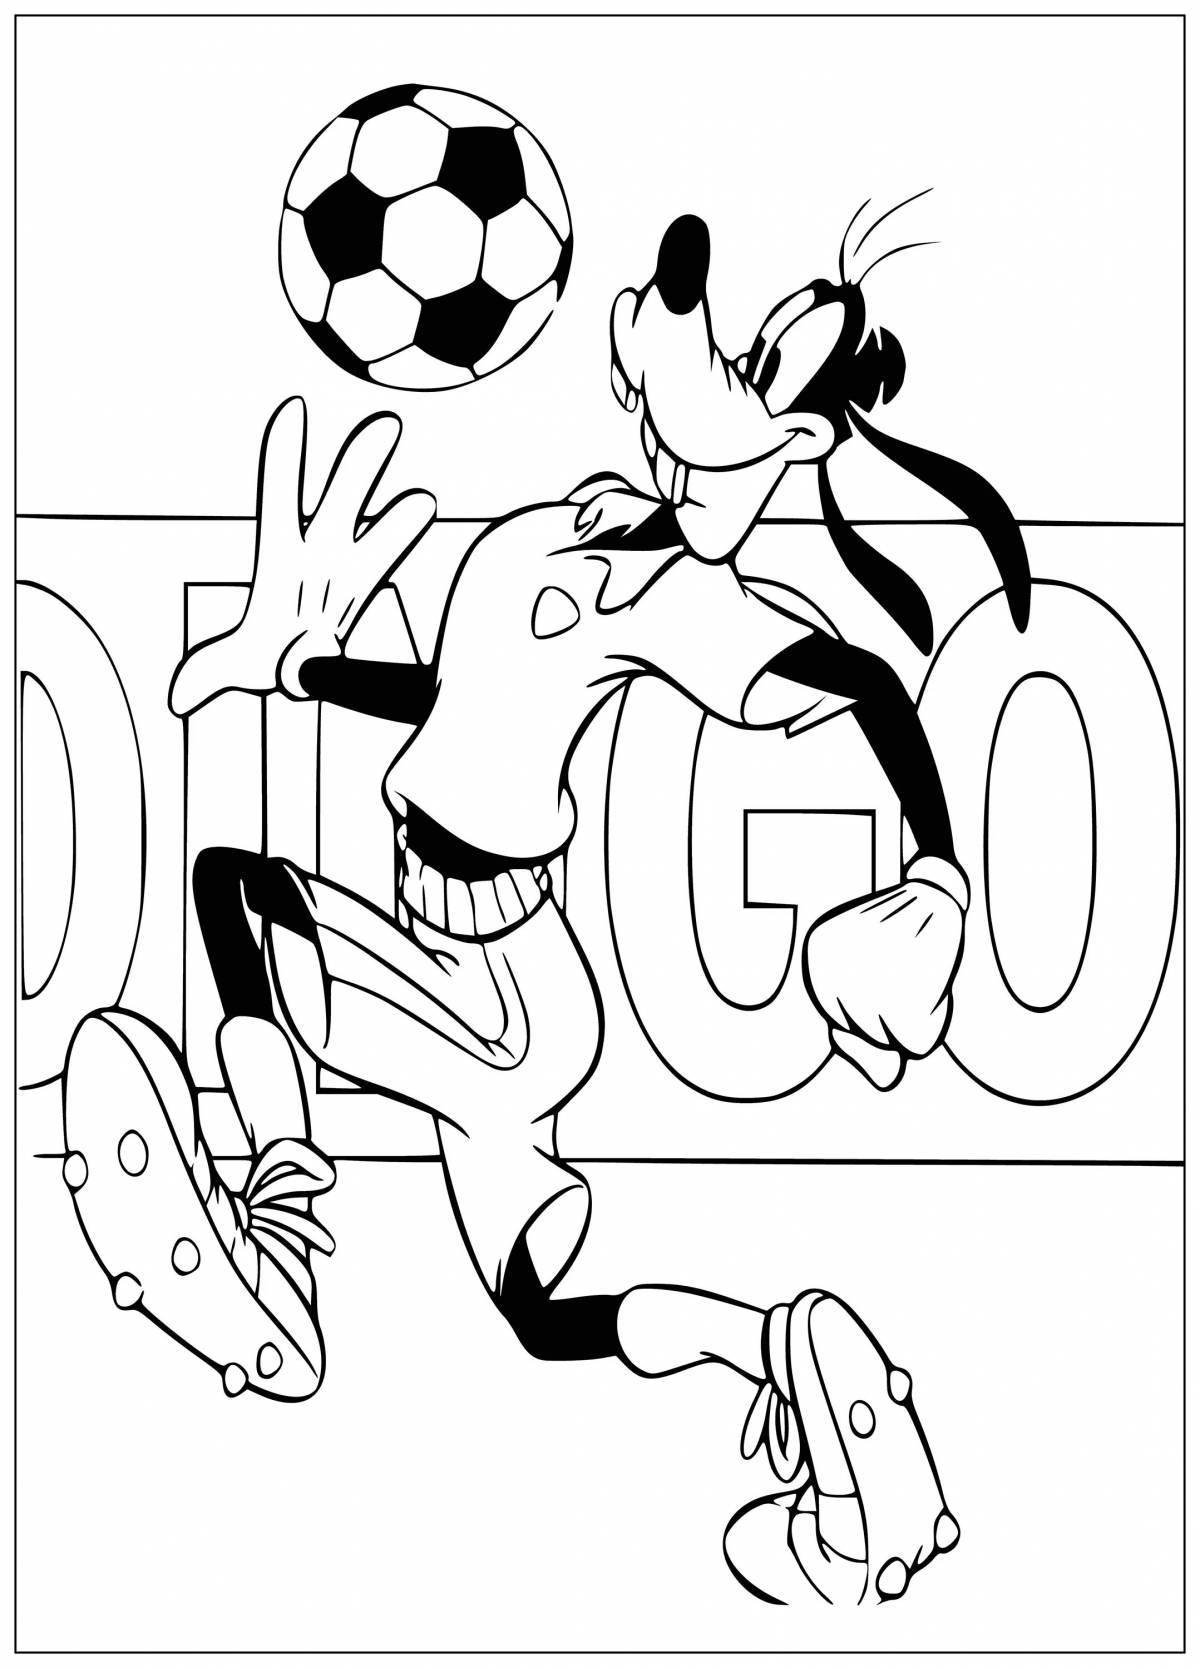 Coloring book funny football for boys